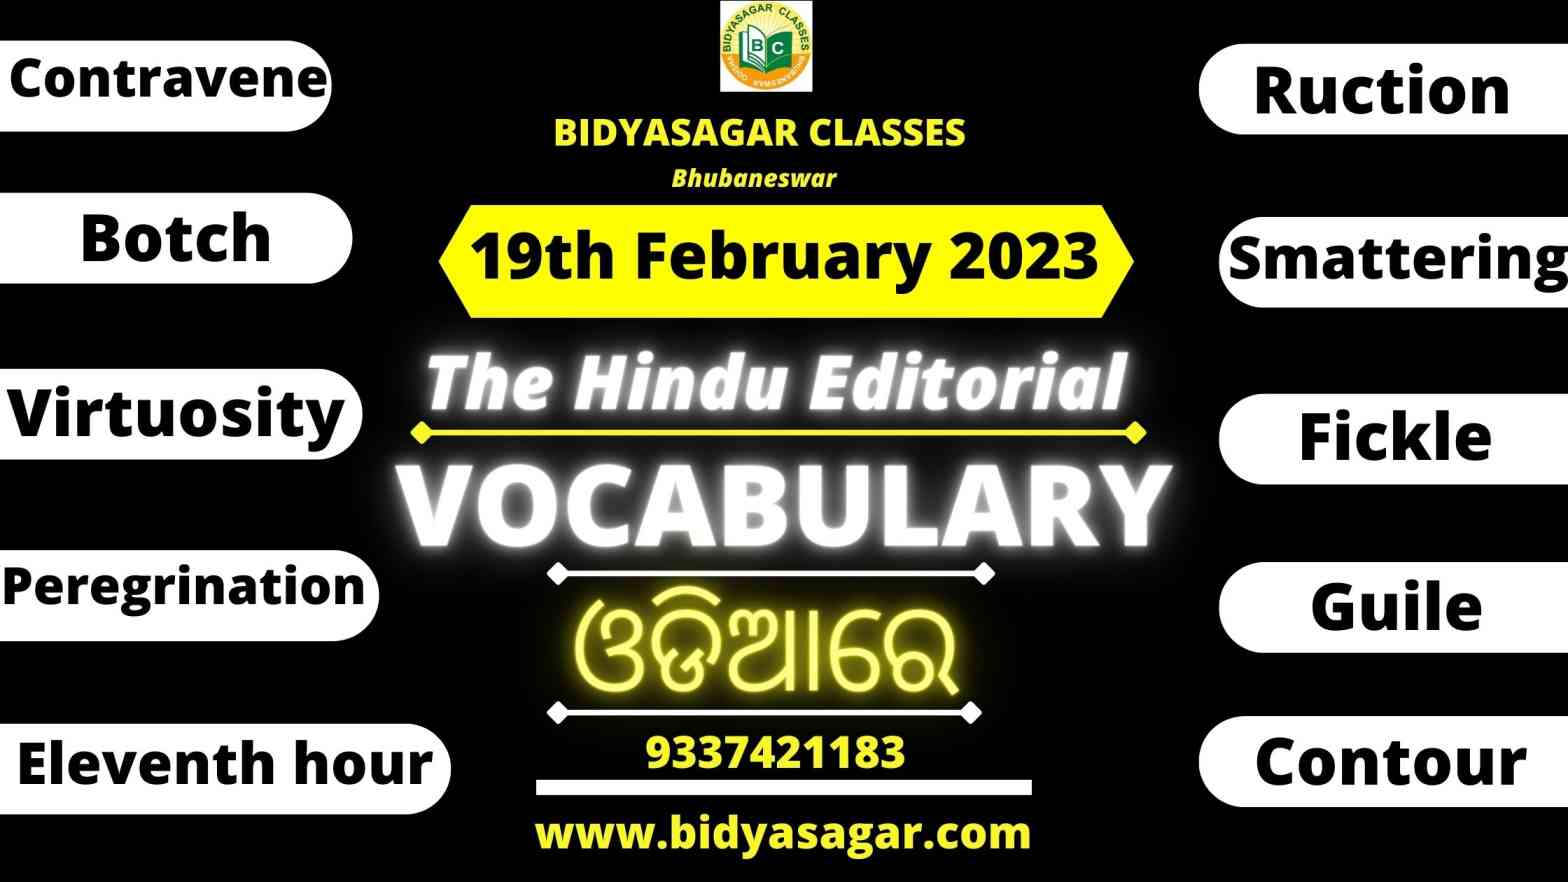 The Hindu Editorial Vocabulary of 19th February 2023